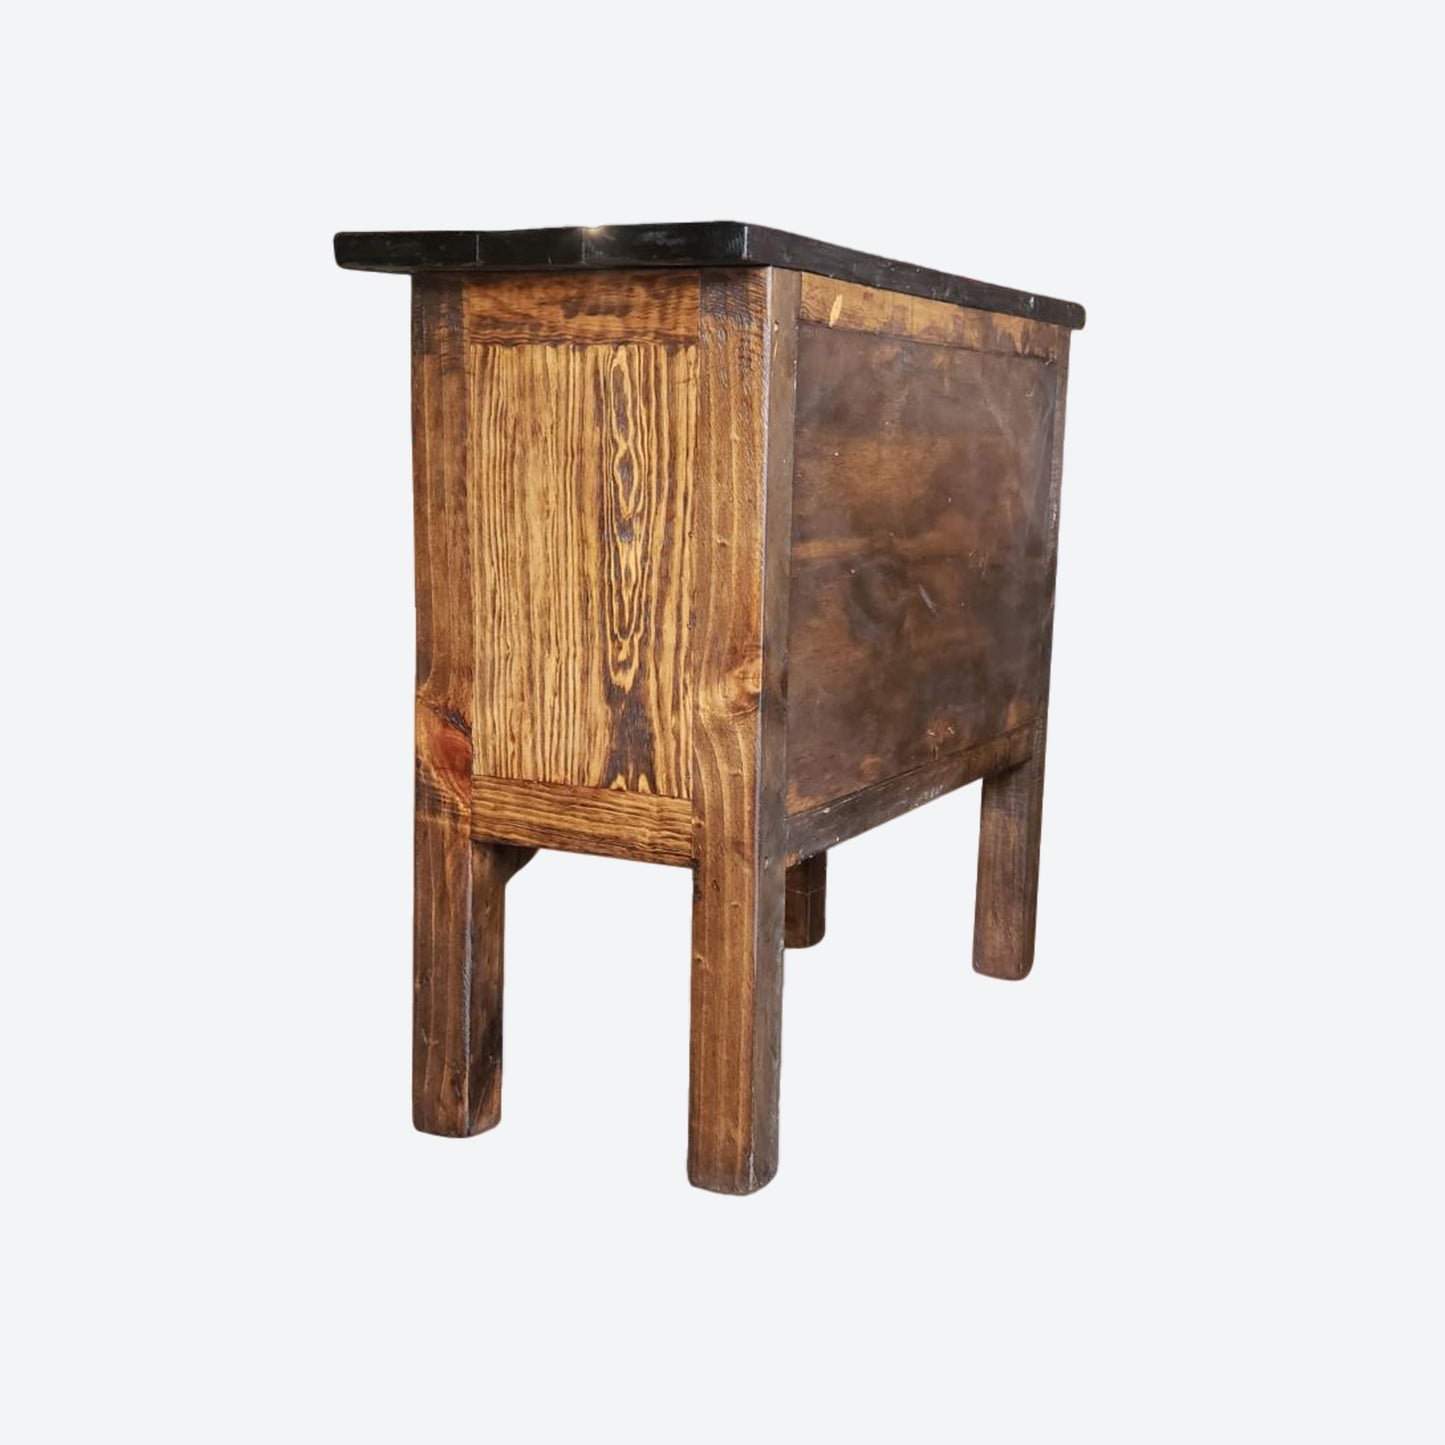 BROWN Mesquite  WOOD CABINET WITH HAMMERED ACCENTS -SK (SKU 1014)